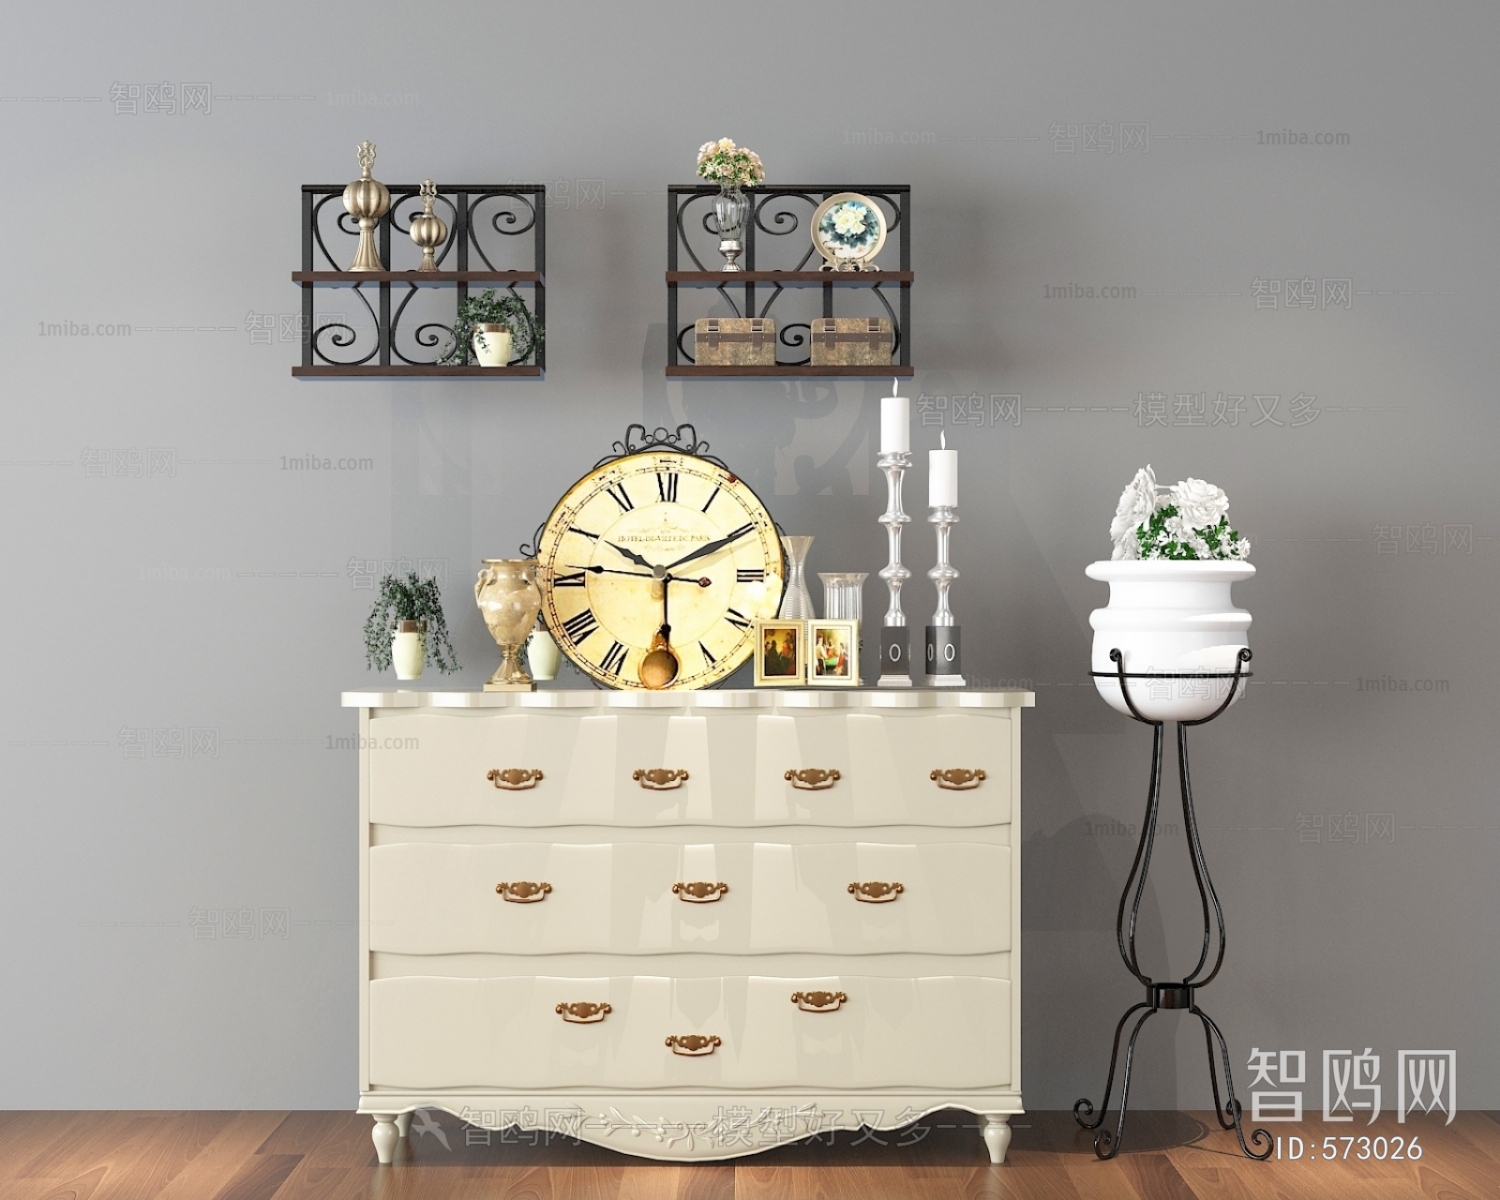 New Classical Style Sideboard